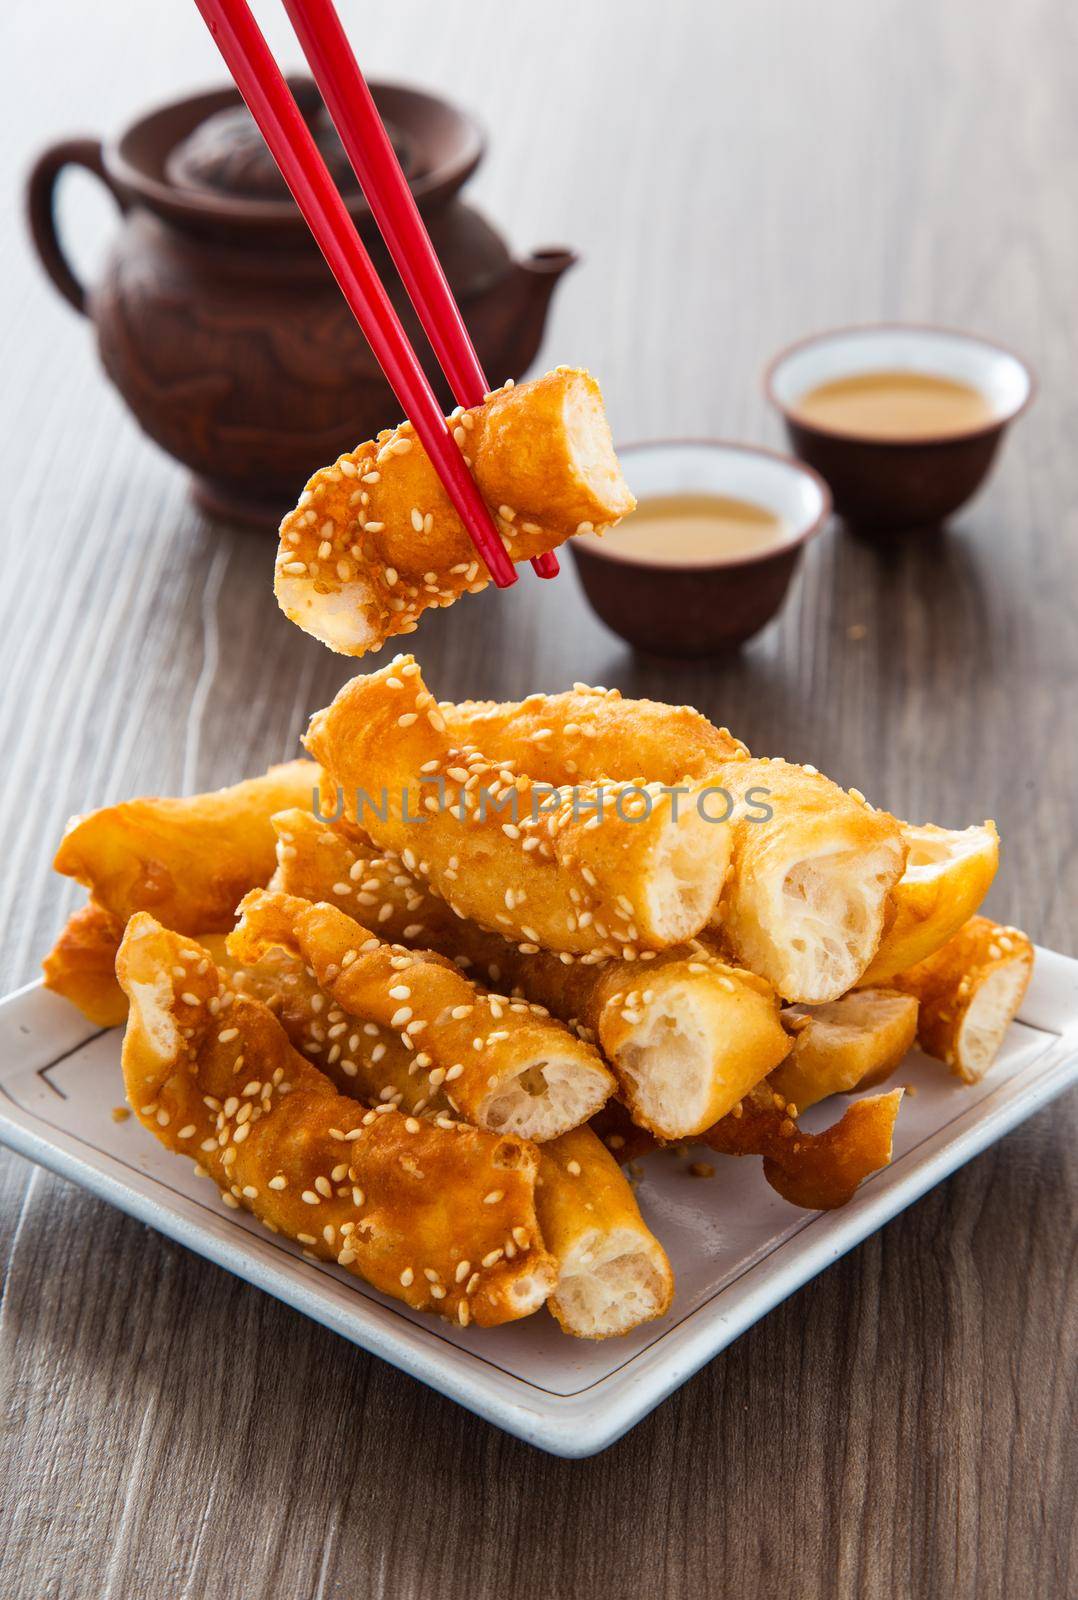 Horse Shoe Fritters, also known as Ma Geok, a popular fried food among Chinese by tehcheesiong